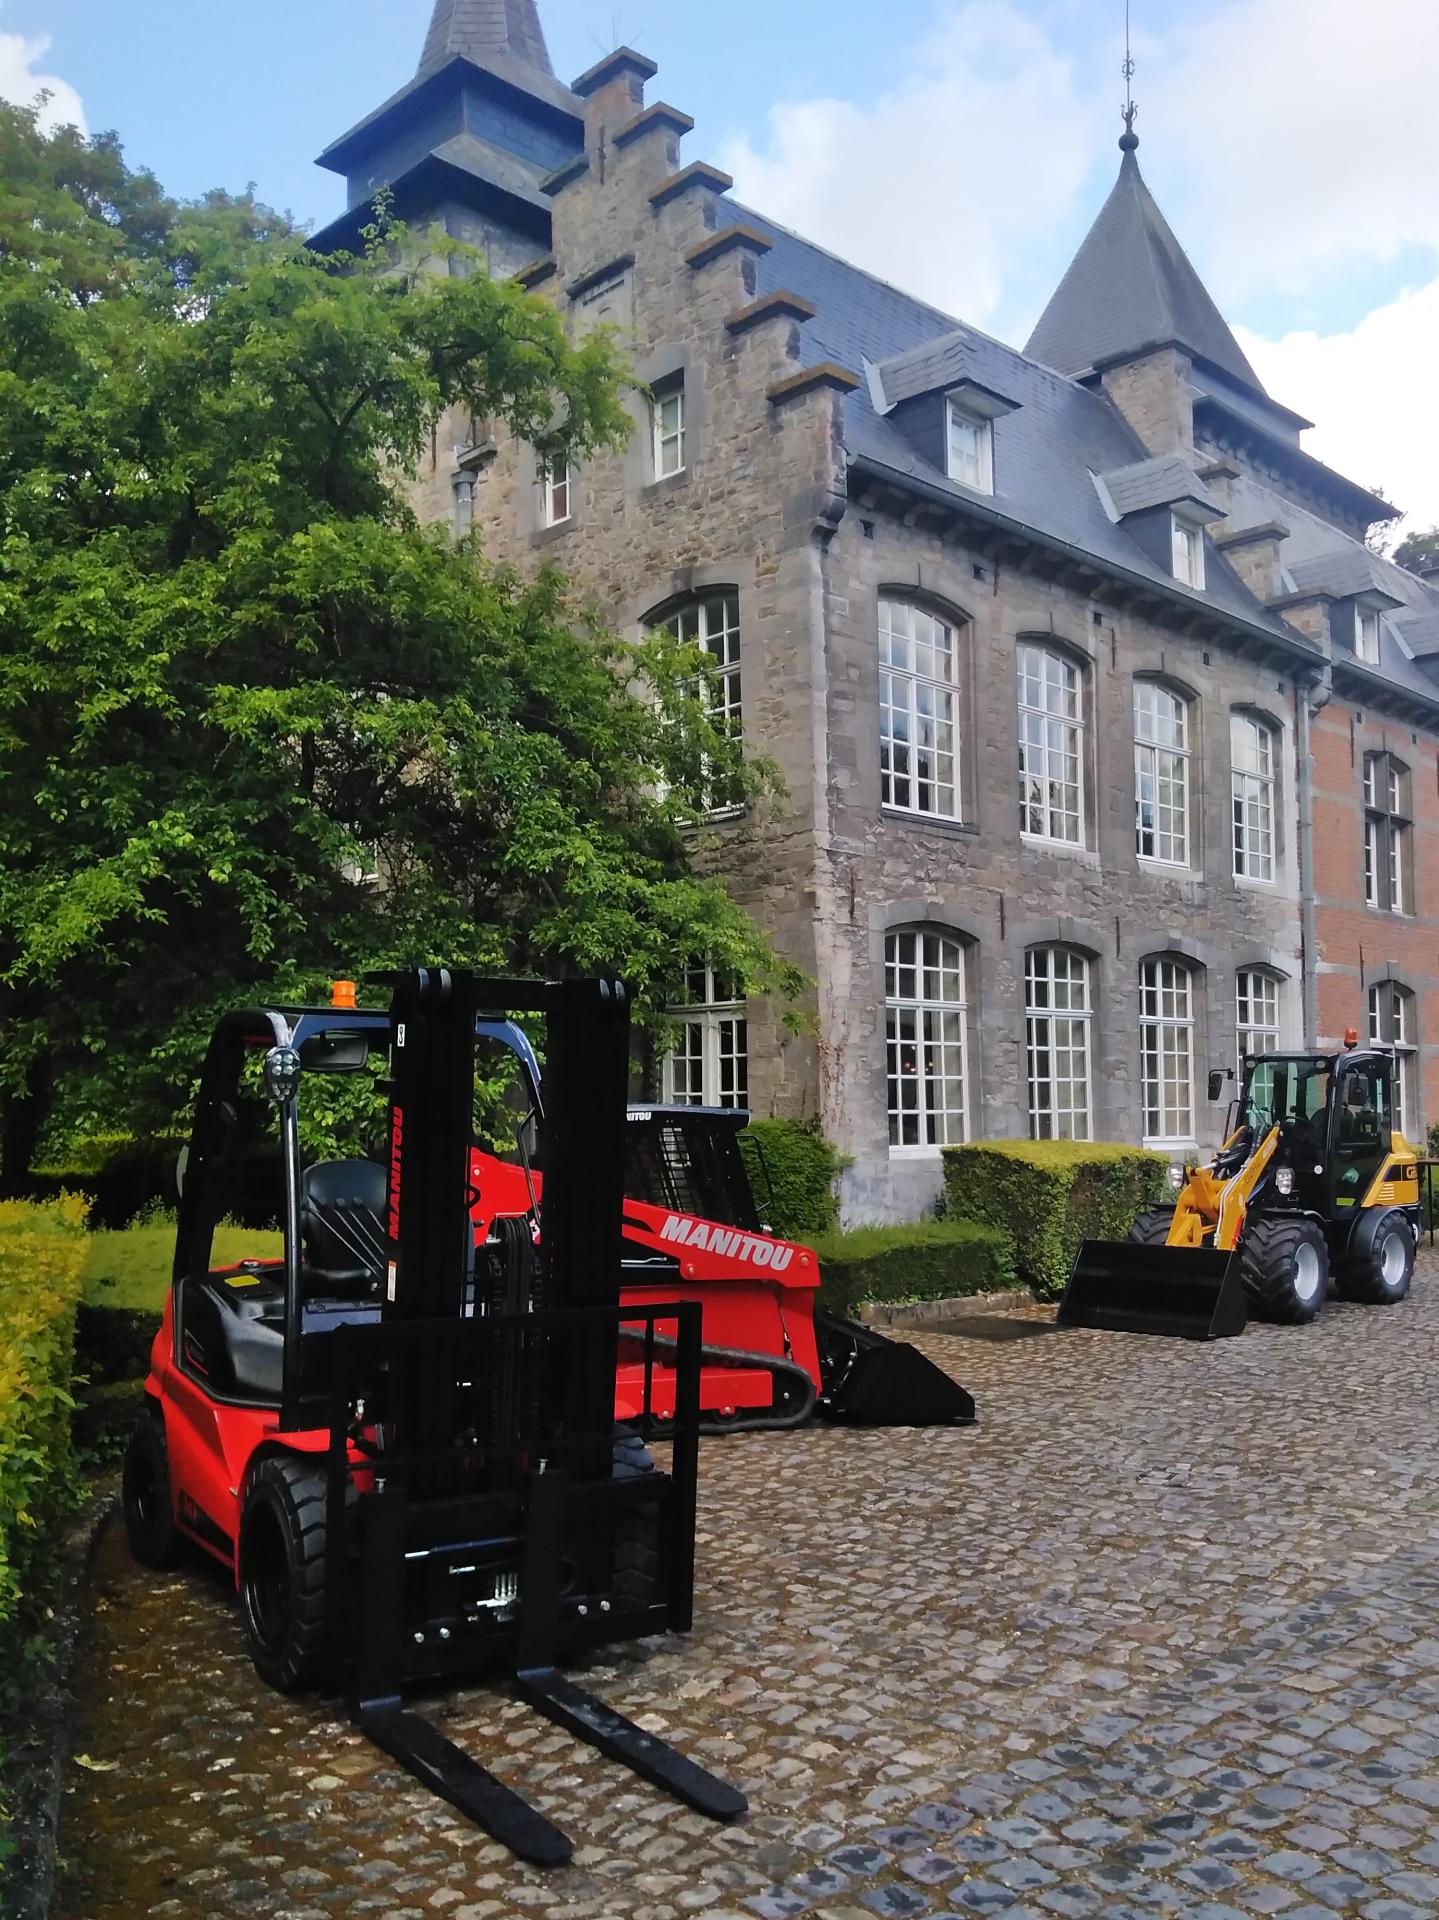 MANITOU Belgium 30 years already MANITOU benelux it was May 24, 2022 (we were present ROAD EQUIPMENT NEWS)